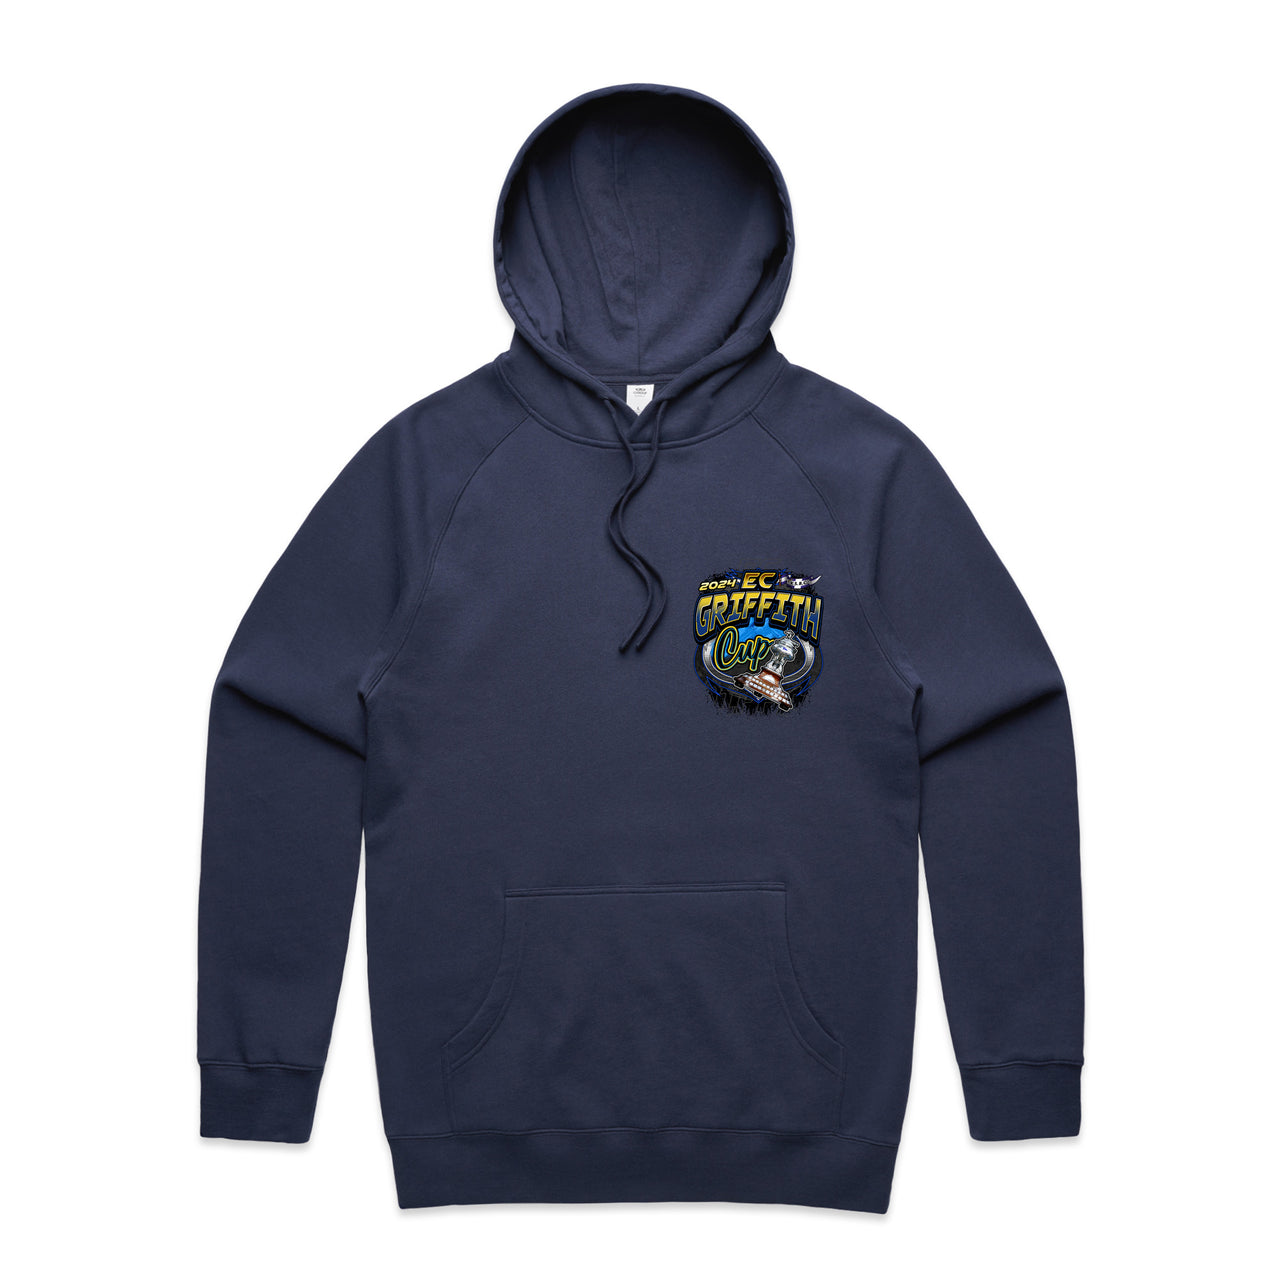 E.C Griffith Cup 2024 Event Mens Hoodie